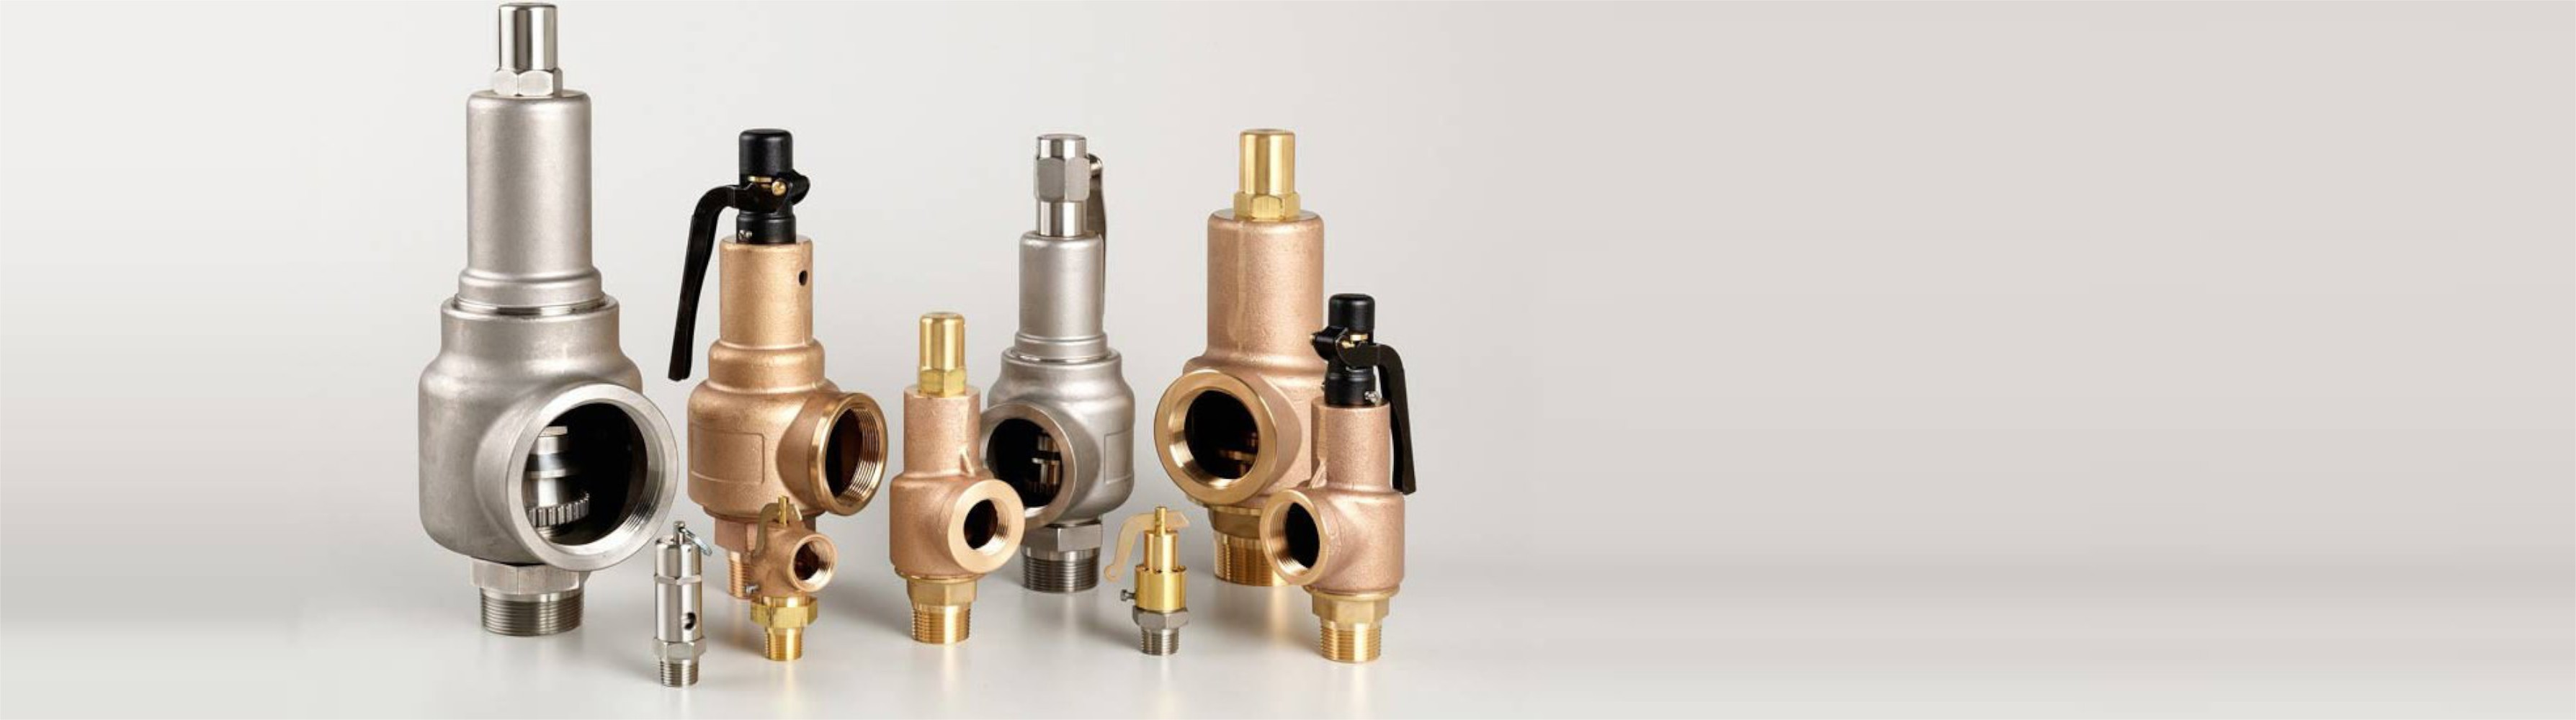 brass and stainless steel safety valves and safety relief valves